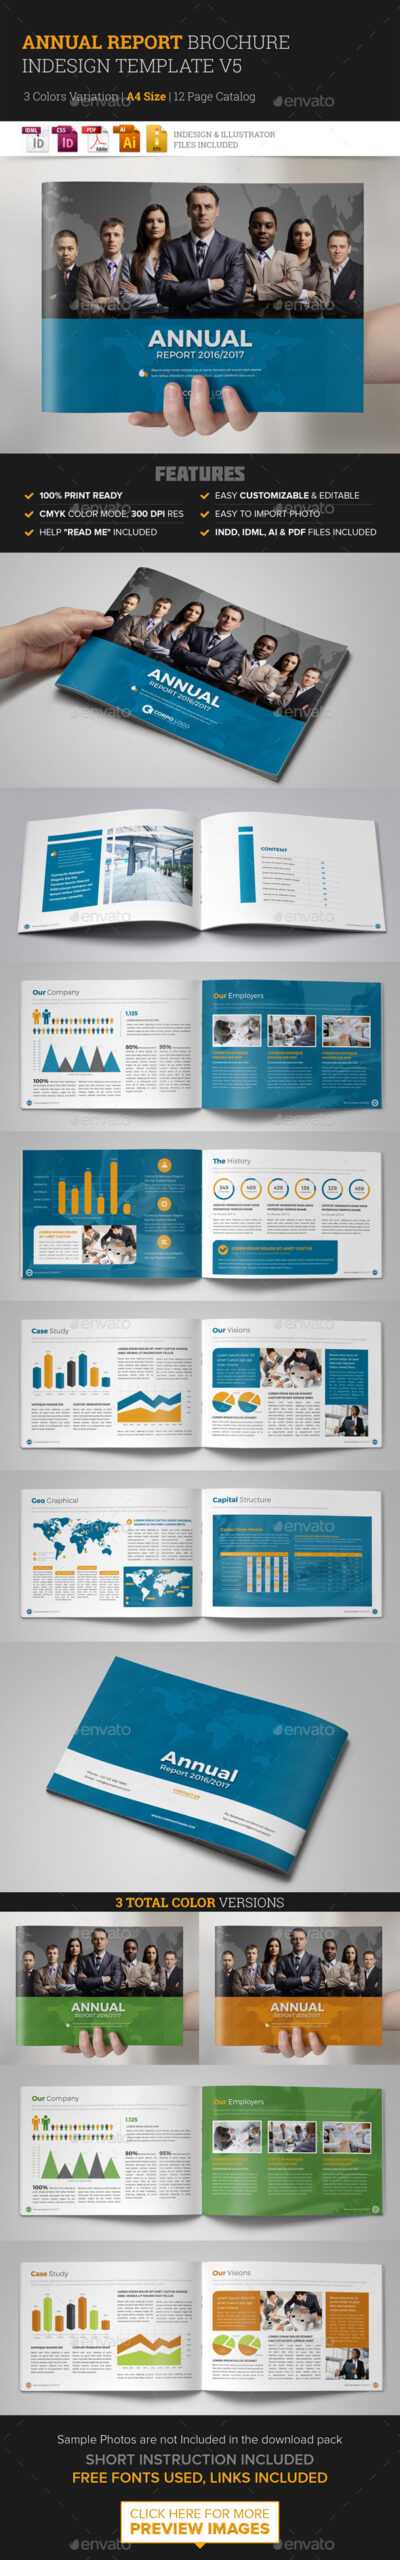 Annual Report Template Indesign Graphics, Designs & Templates Regarding Free Indesign Report Templates